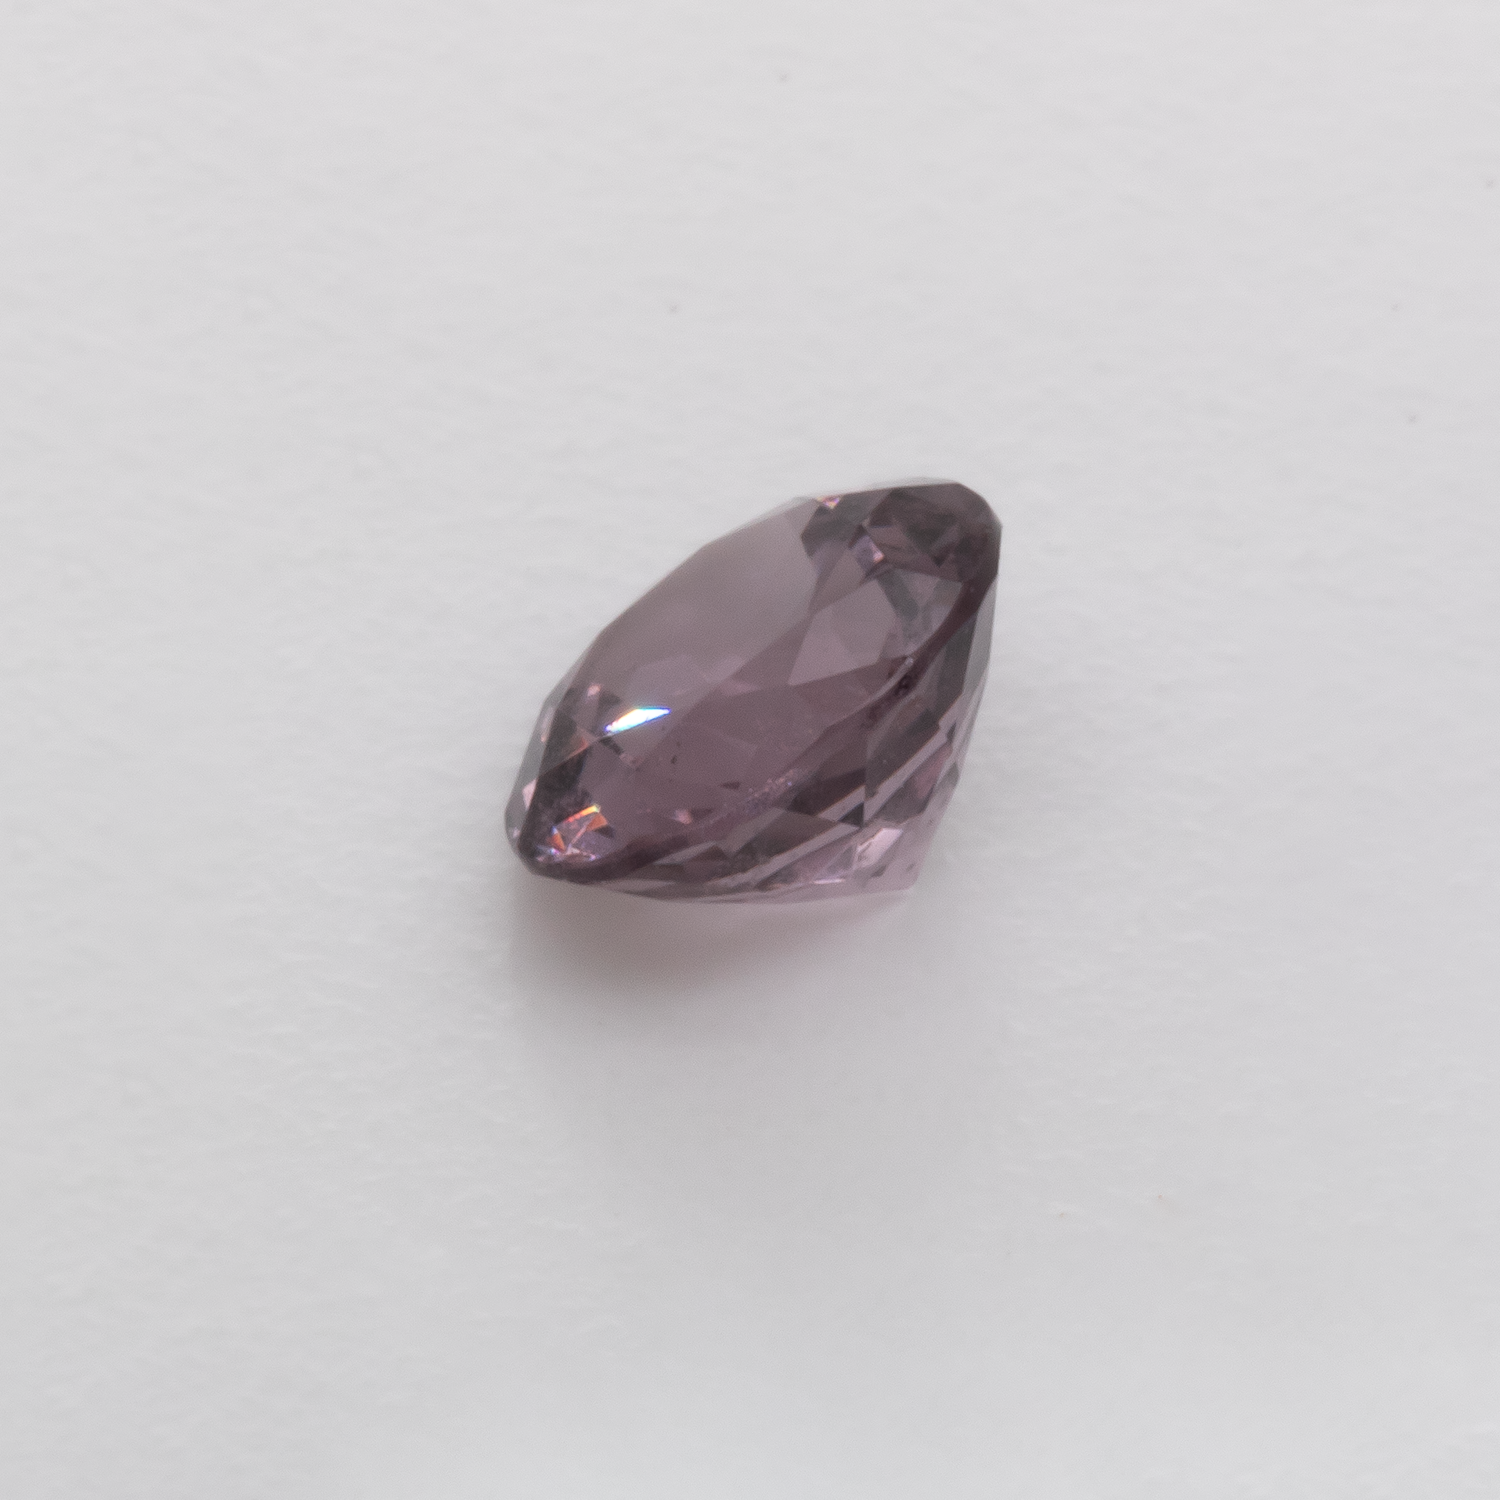 Spinel - pink, round, 5.1x5.1 mm, 0.56 cts, No. SP90014